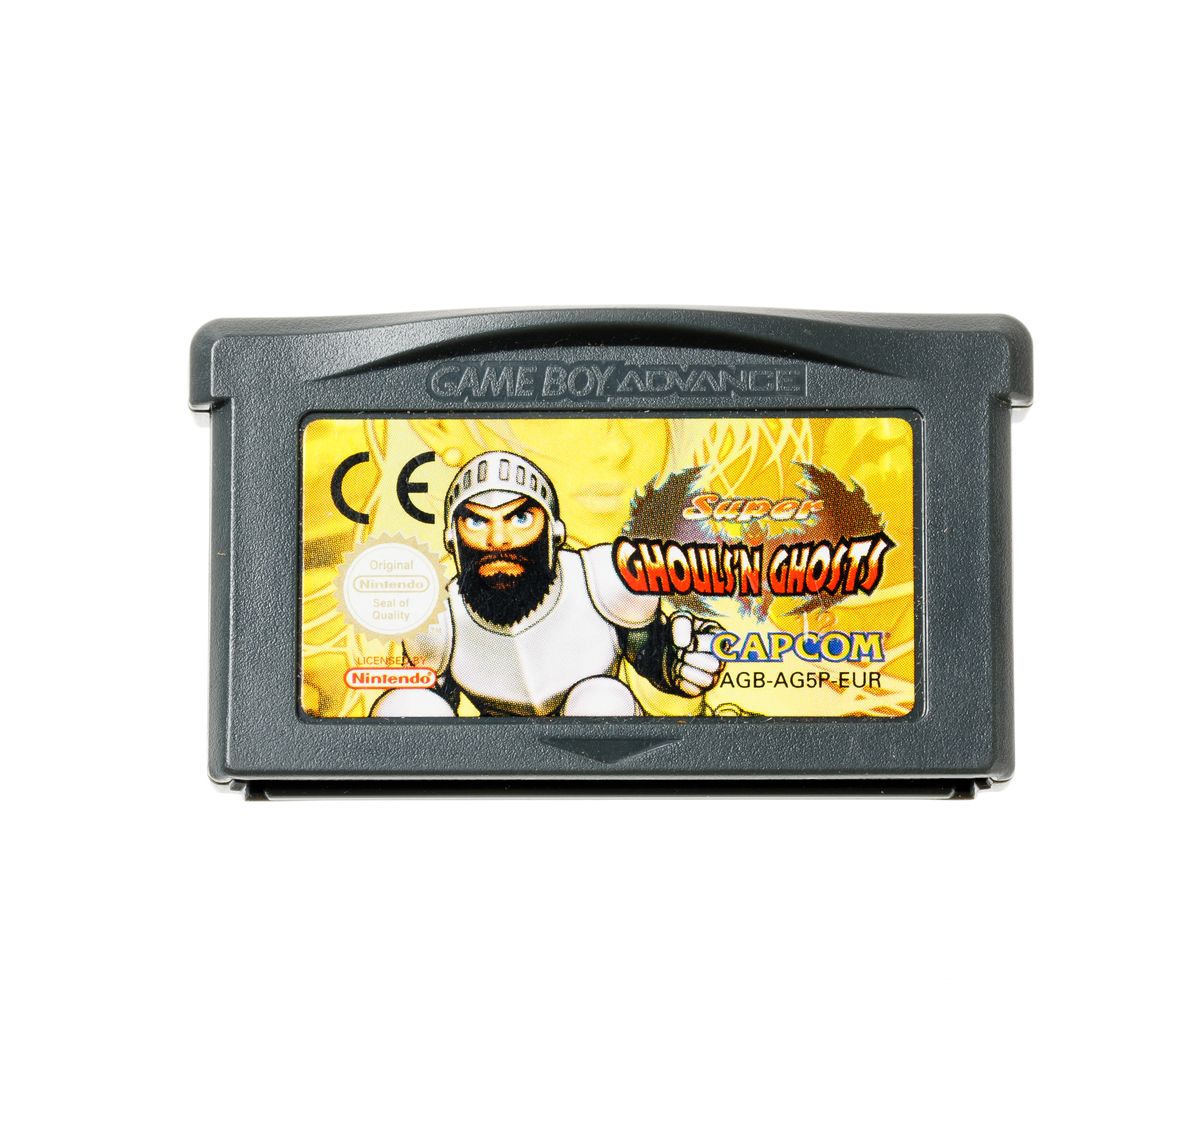 Super Ghouls 'N Ghosts - Gameboy Advance Games